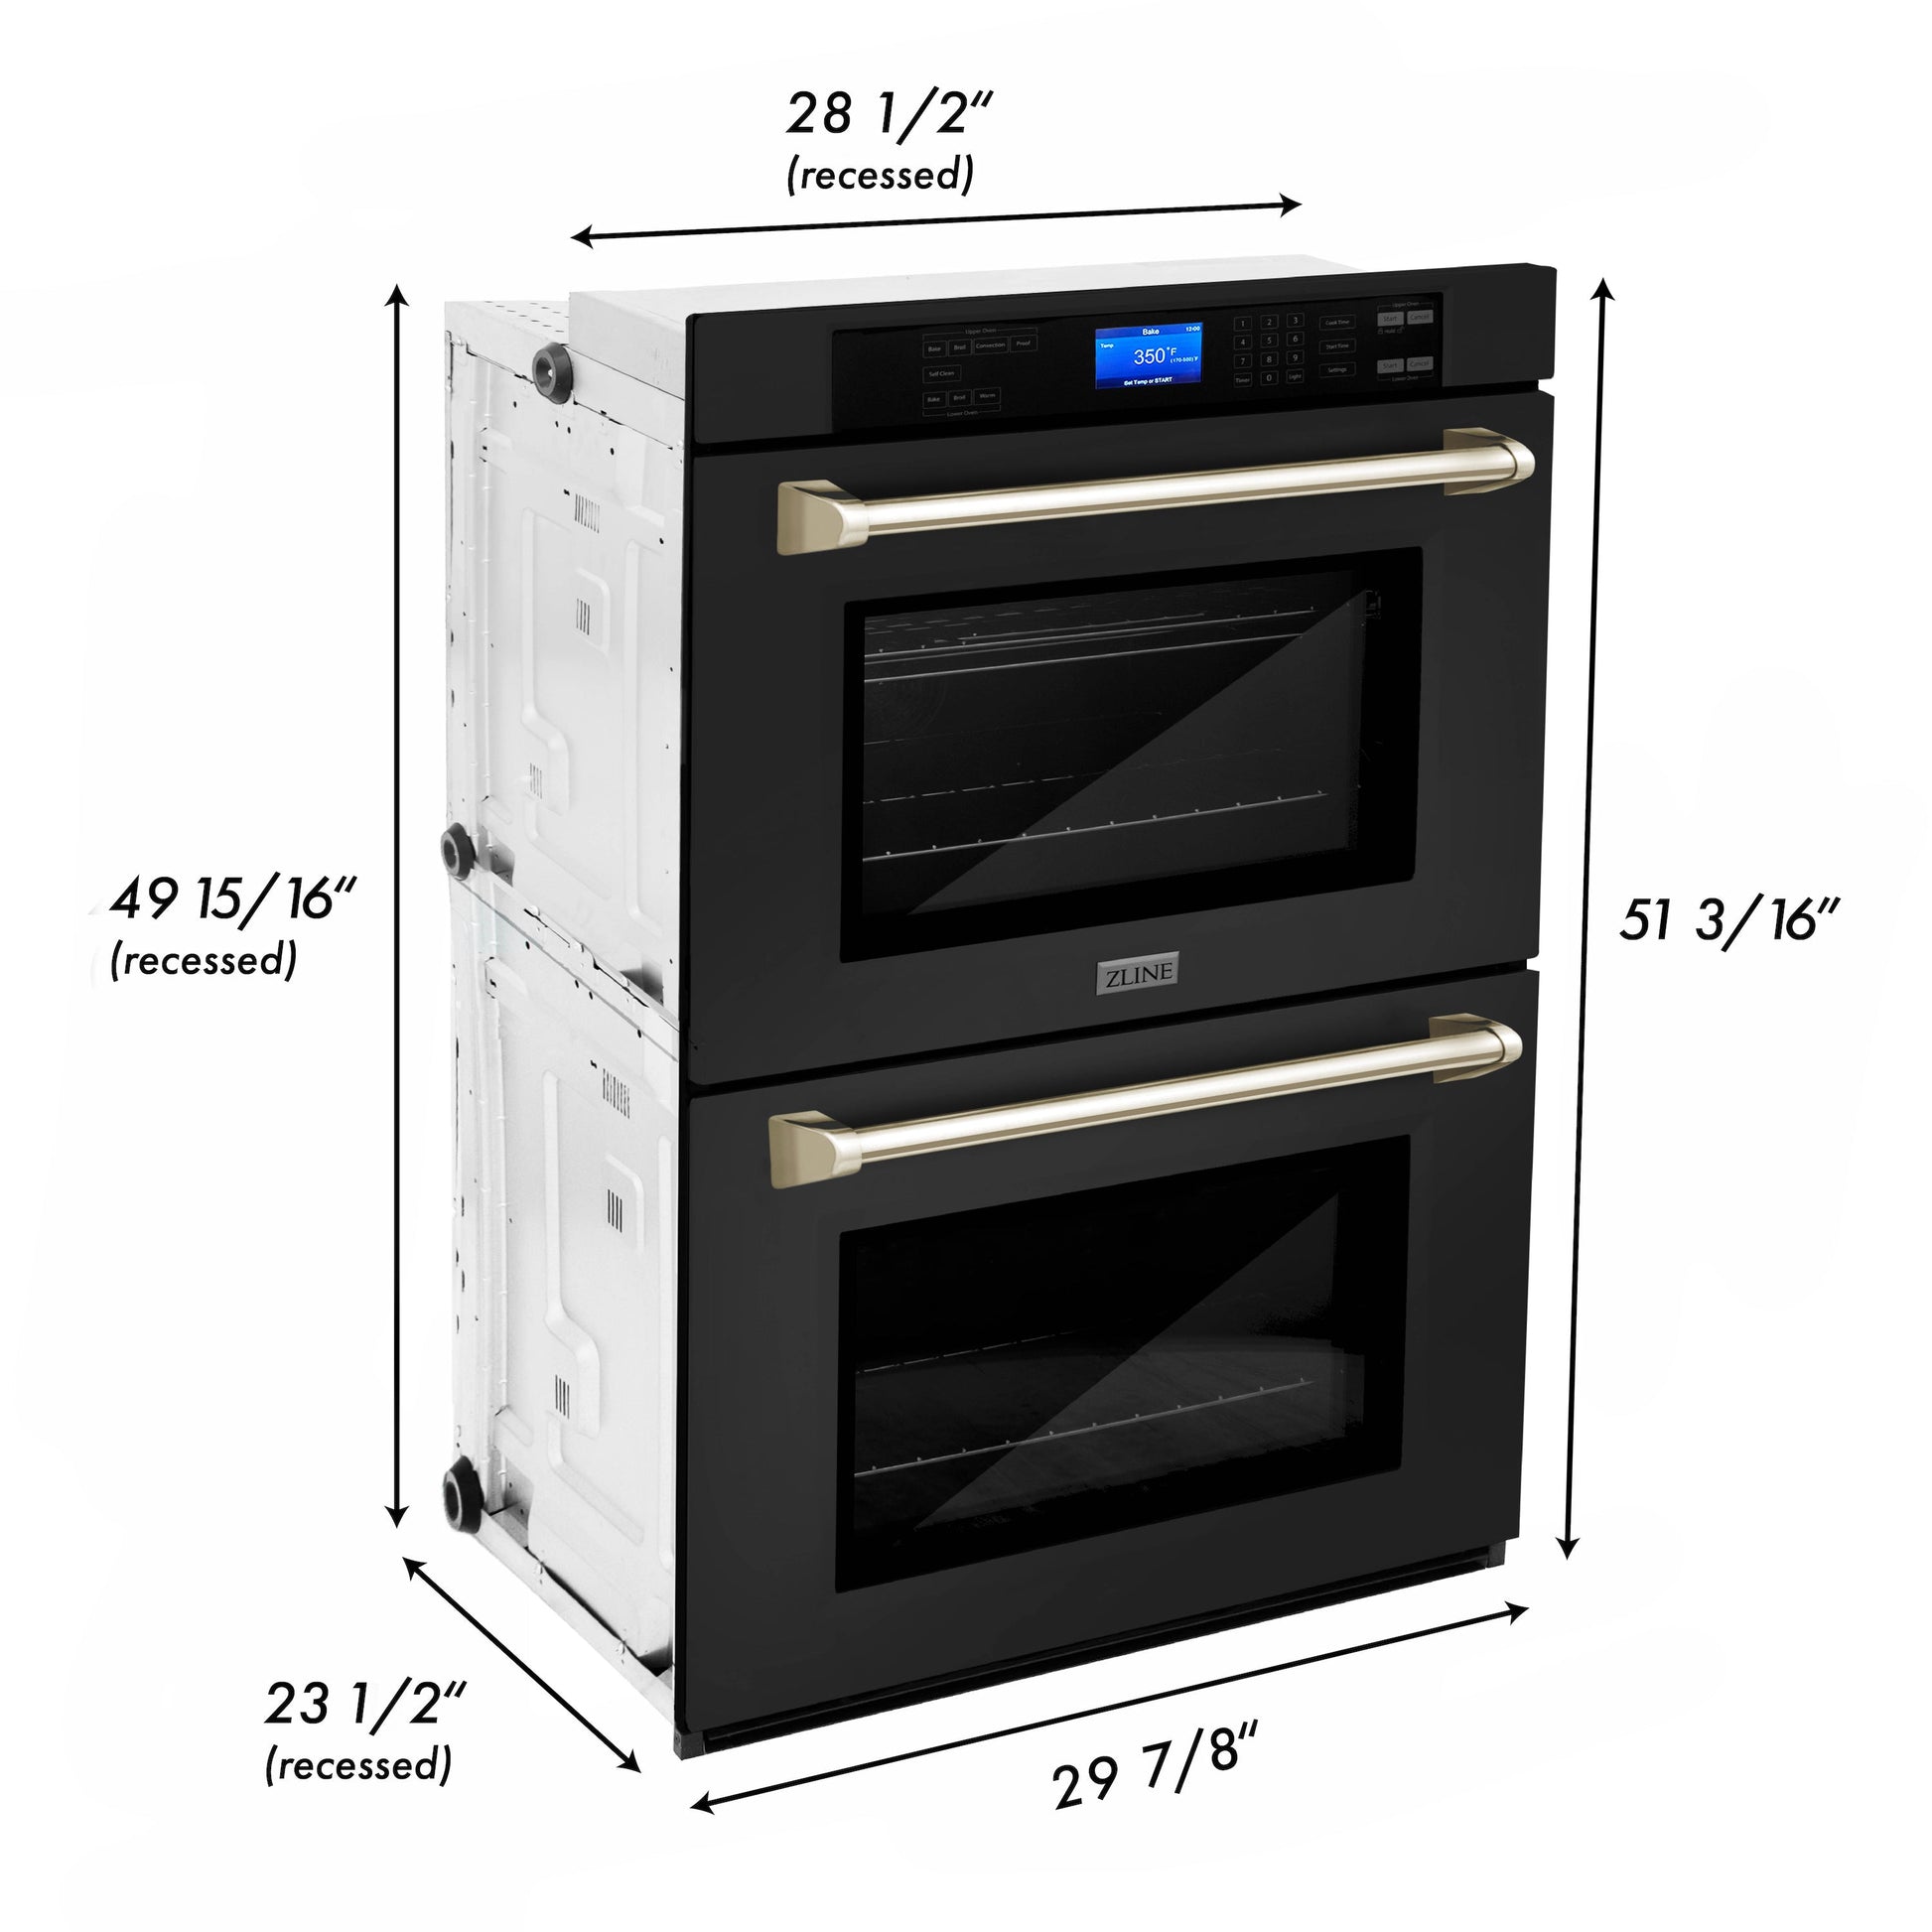 ZLINE 30" Autograph Edition Double Wall Oven with Self Clean and True Convection in Black Stainless Steel and Gold